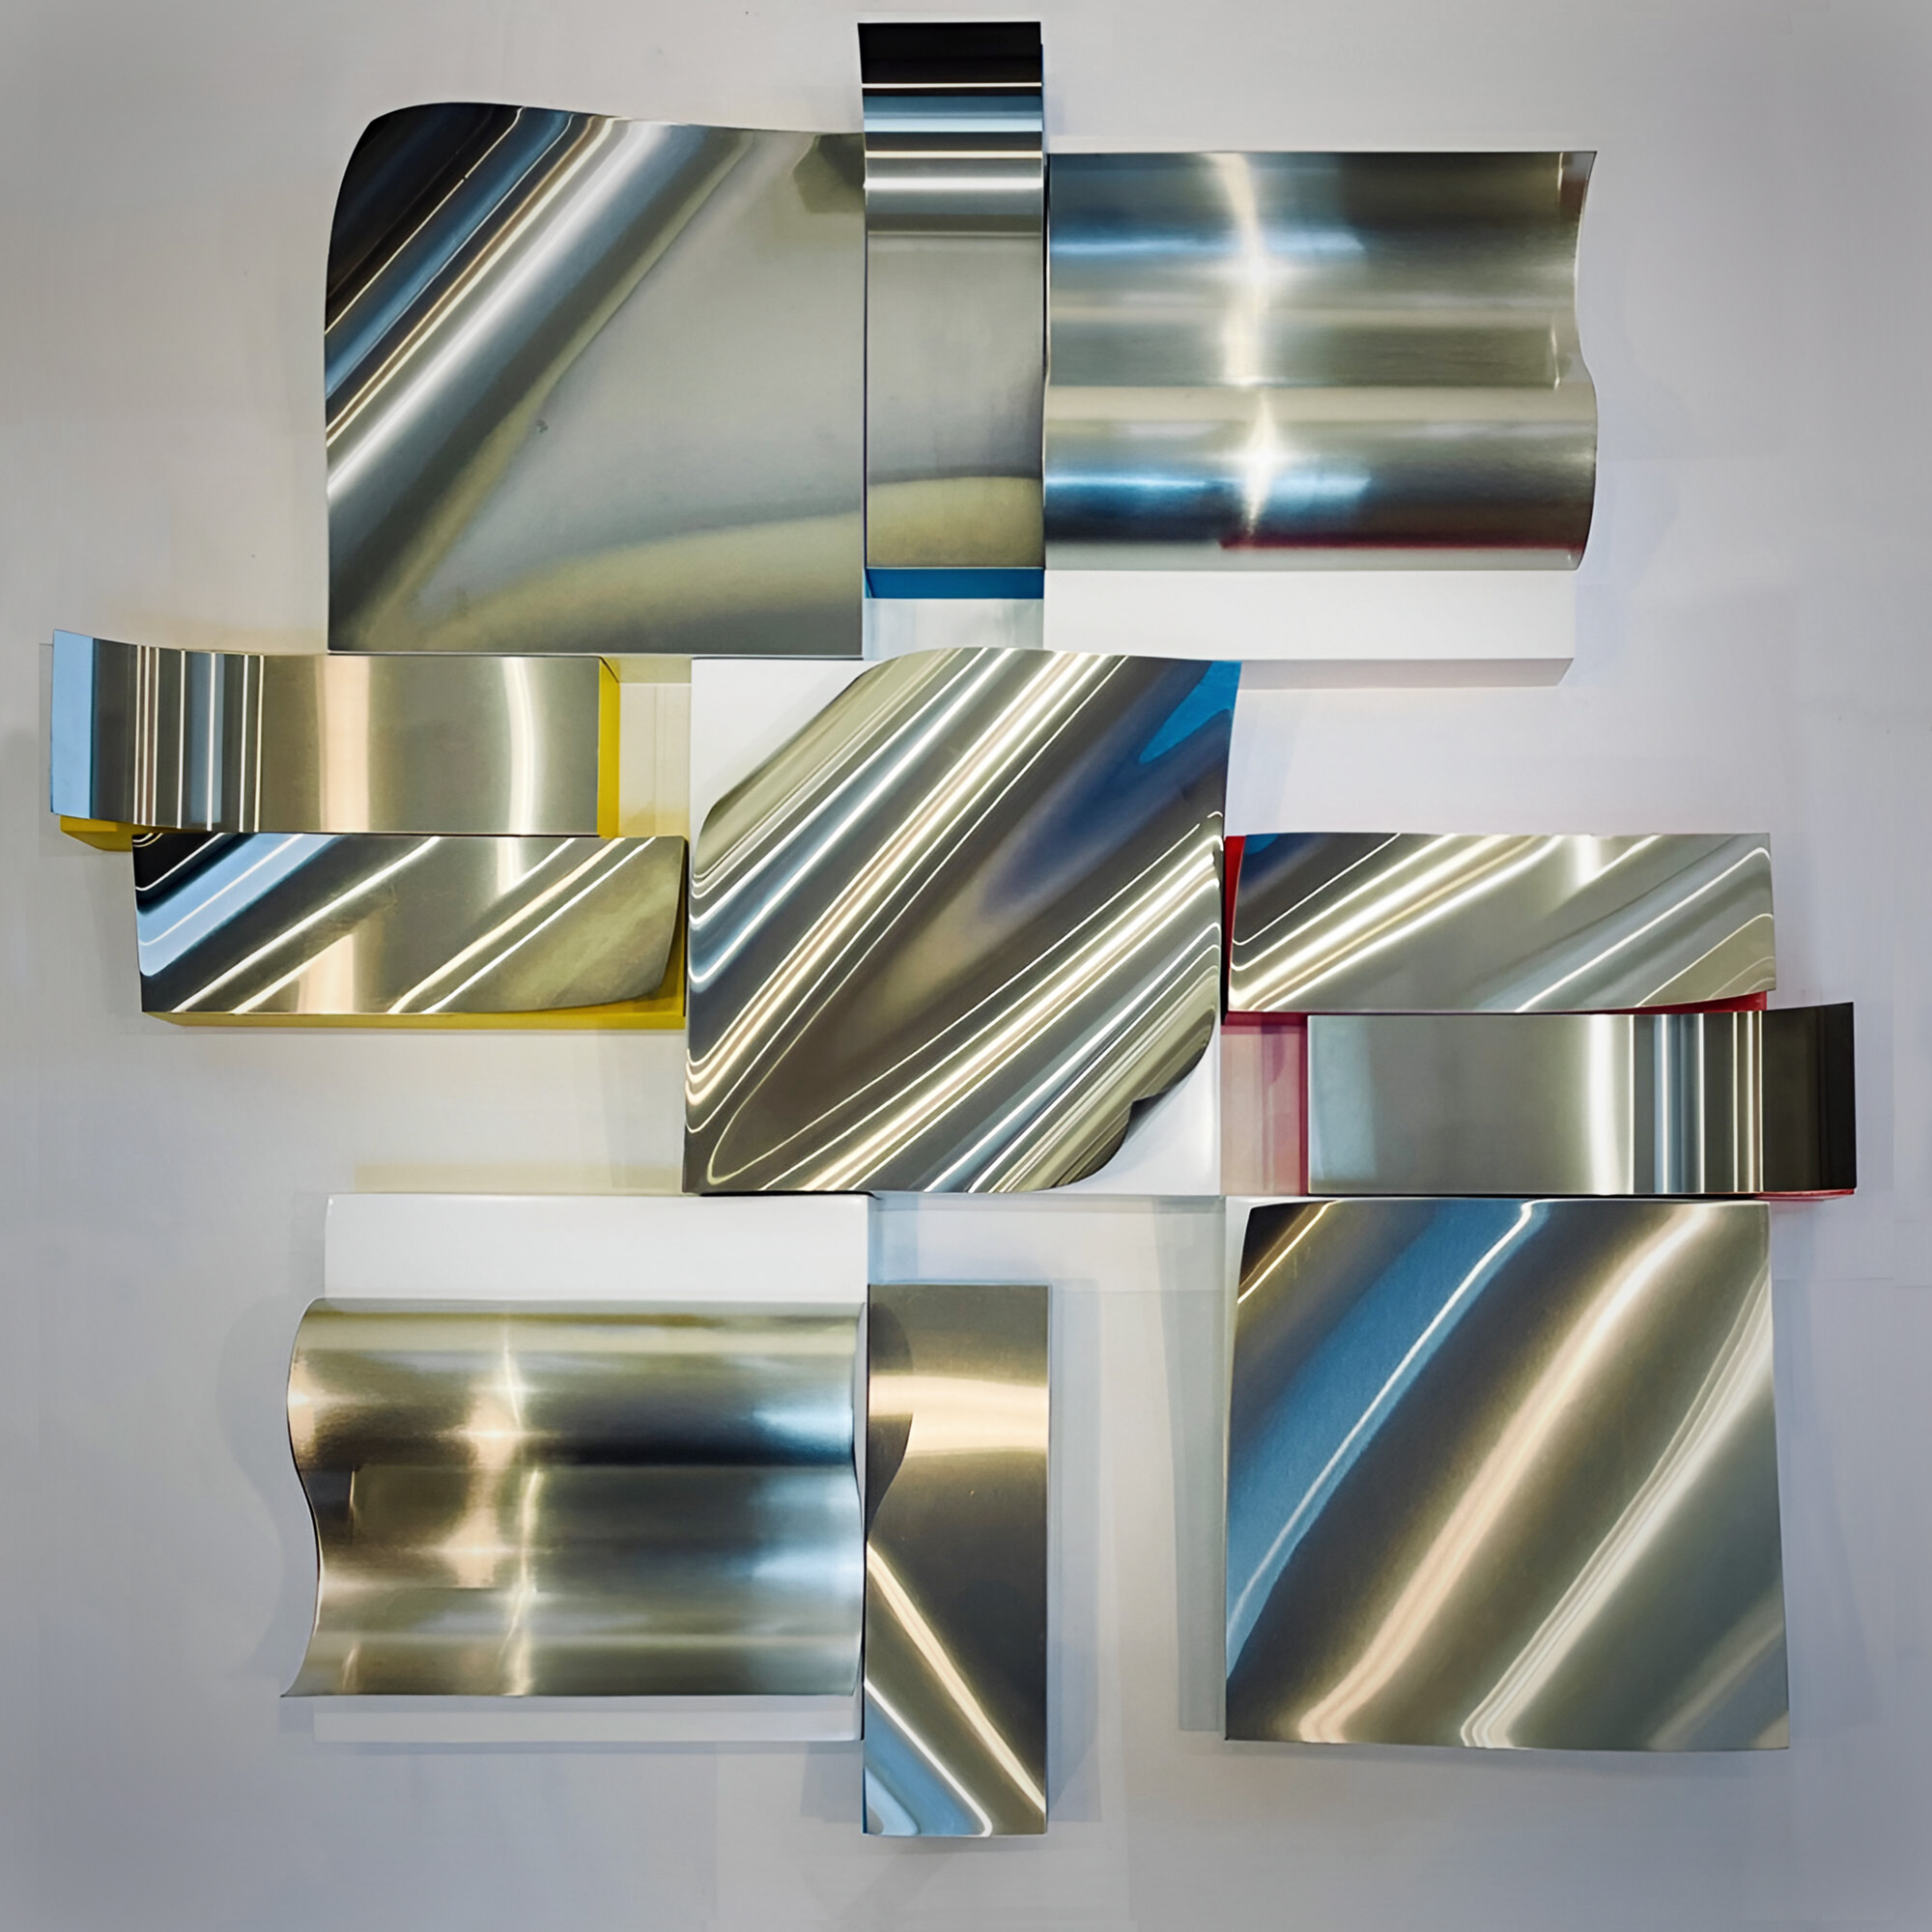 Robert Parker Undulations - Stainless Steel on Painted Boxes